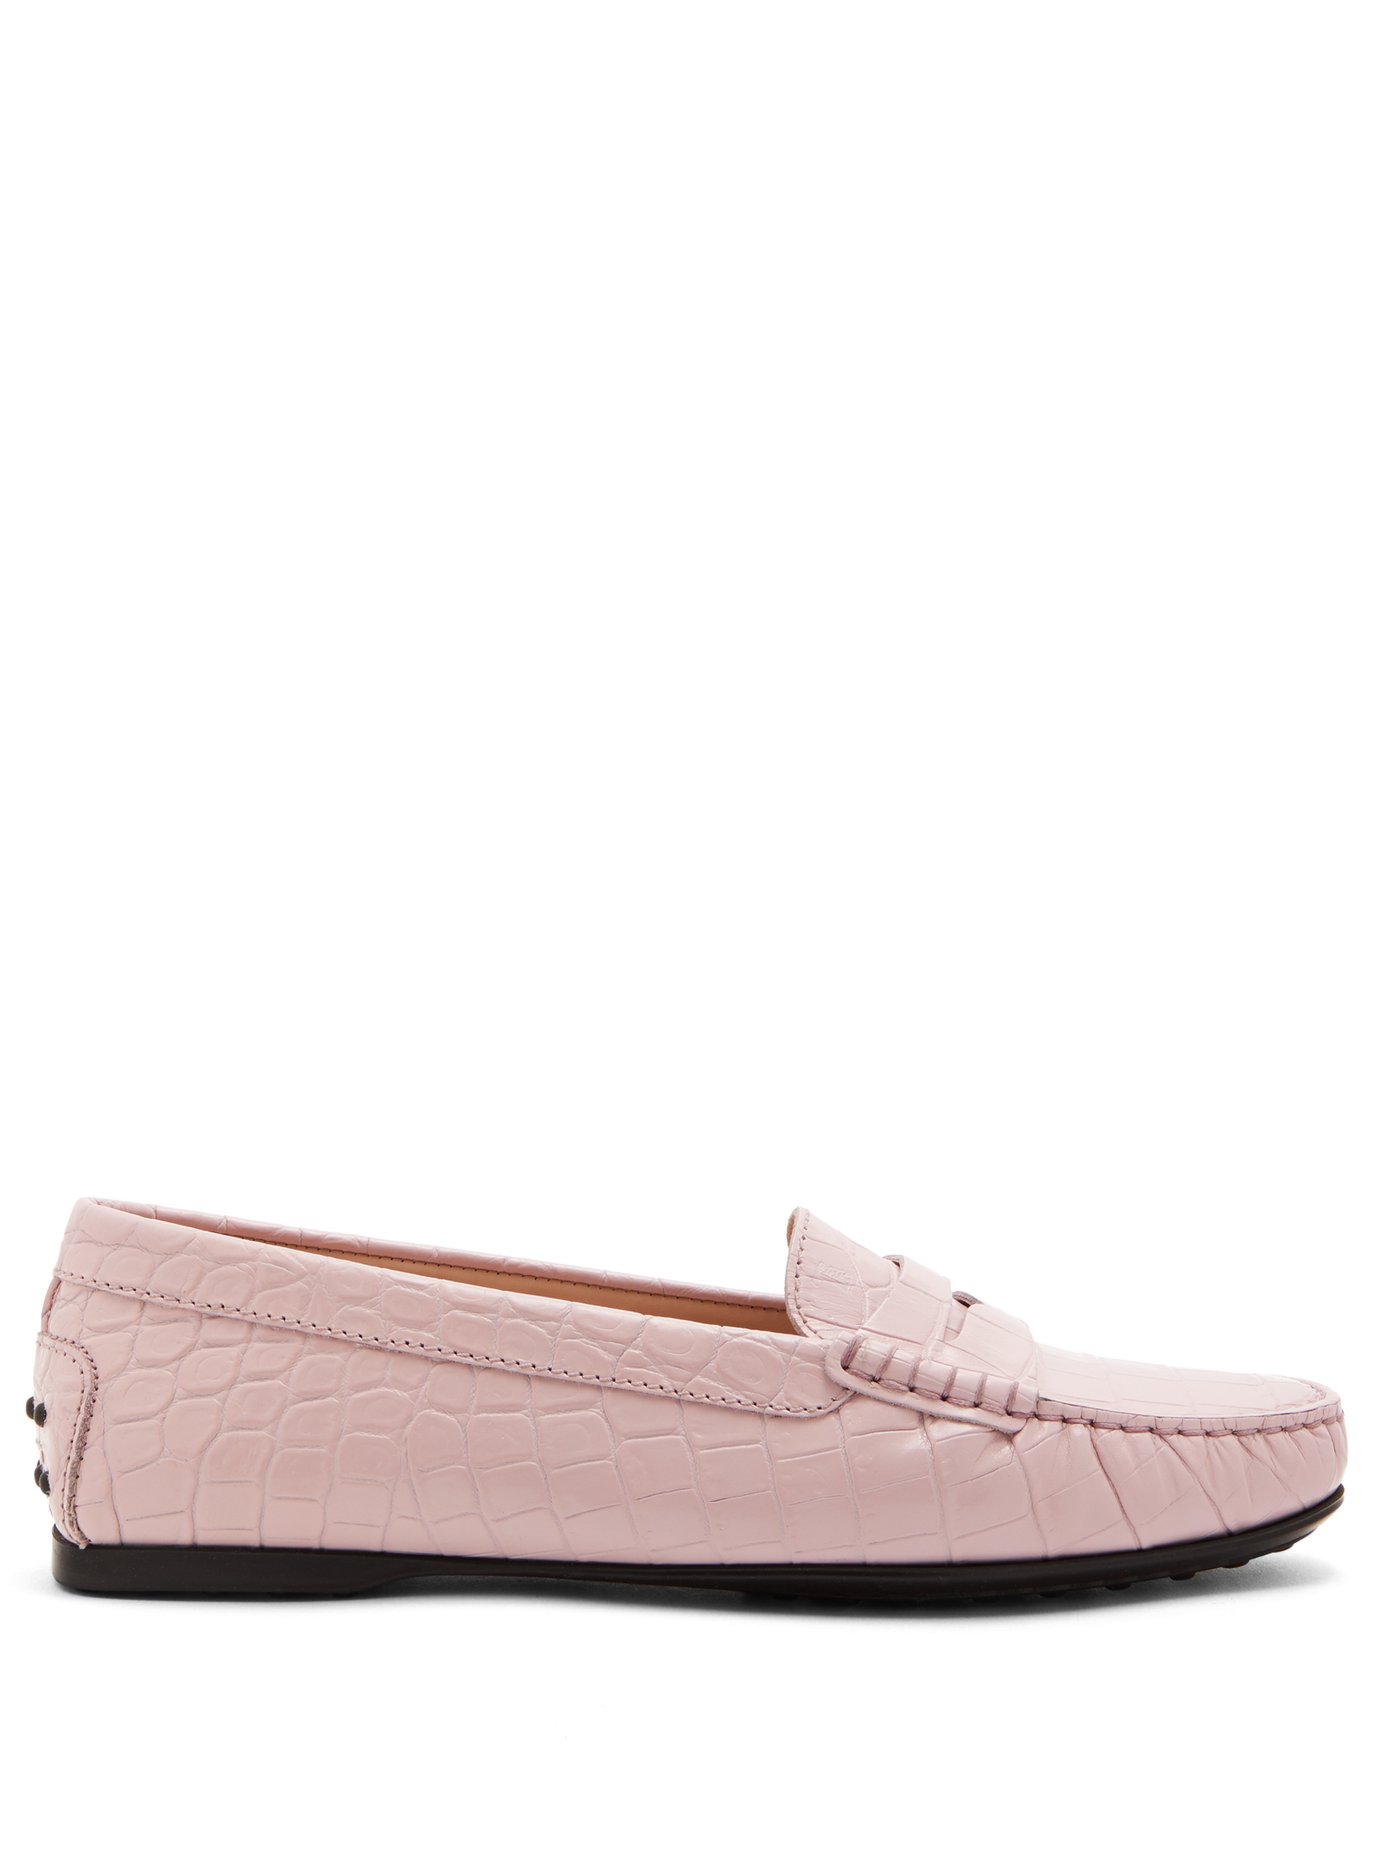 Gomma leather loafers | Tod's 